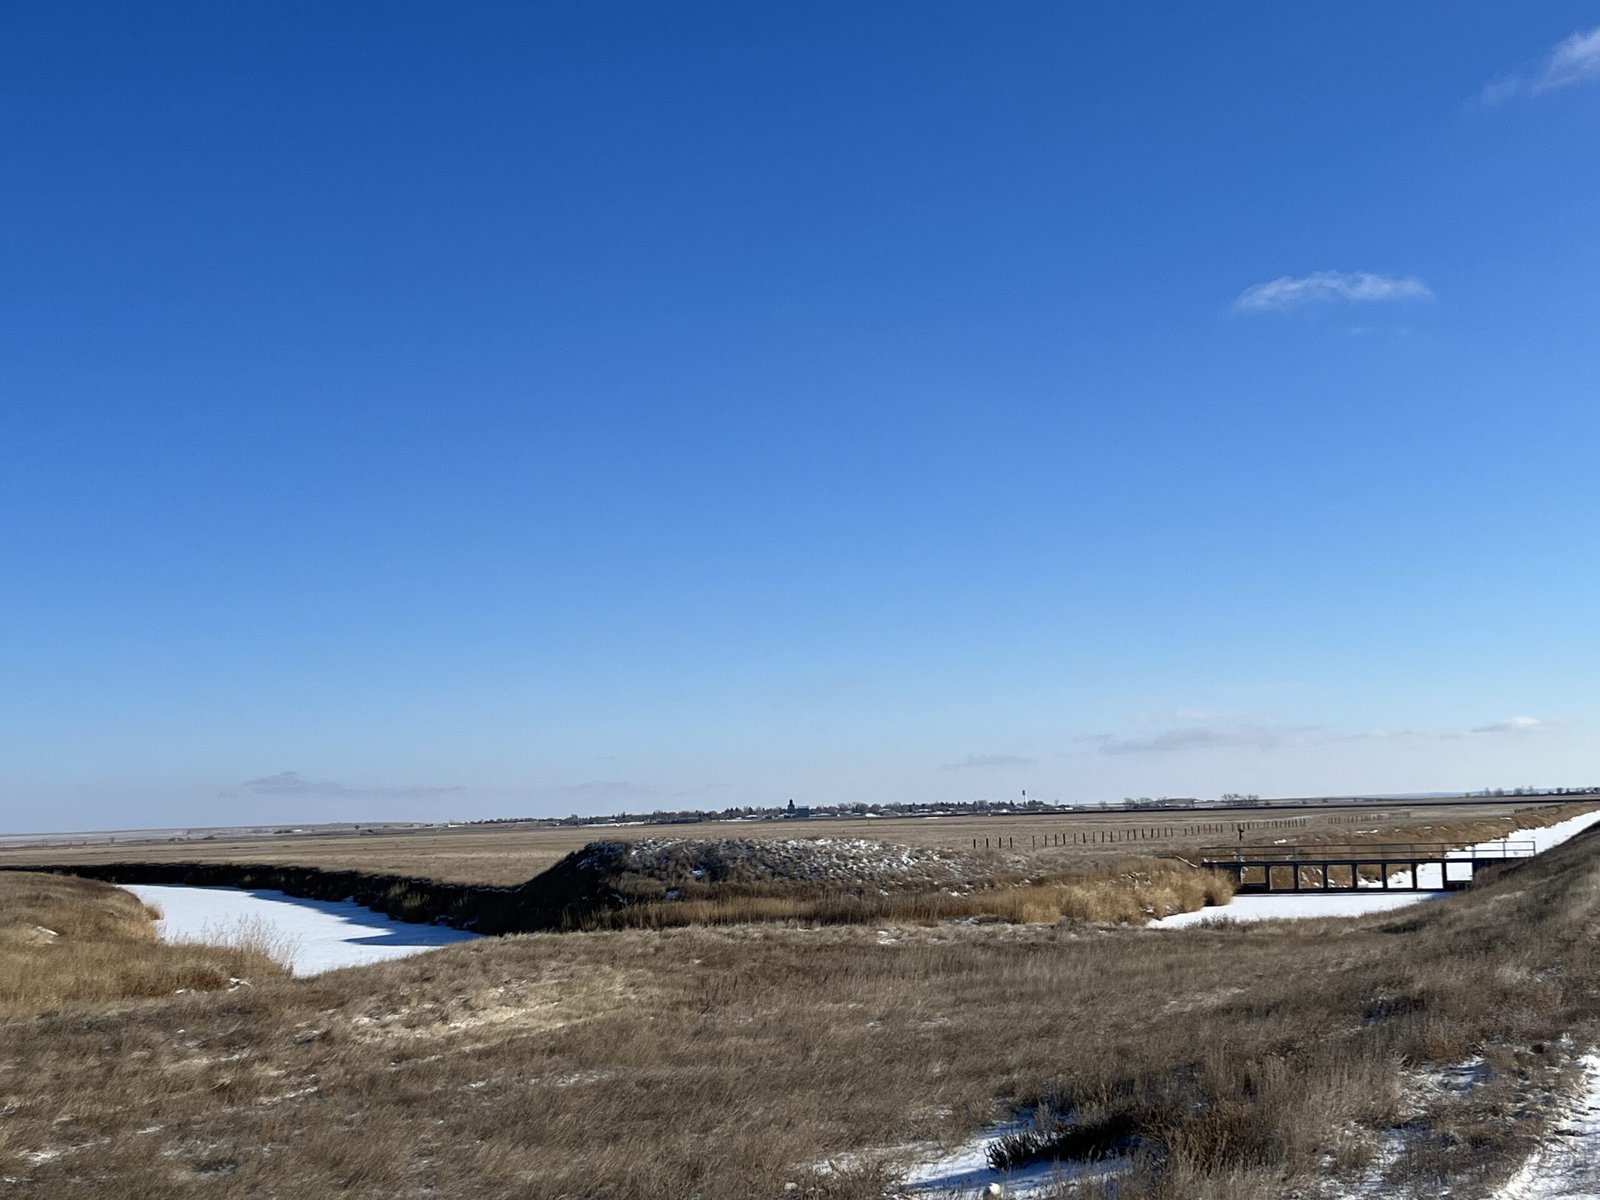 The Big Muddy Creek, on which the Fort Peck Tribes have a water right, flows through some dams and diversions, pictured on the right, that are managed by the Medicine Lake National Wildlife Refuge to fill the lake as needed.